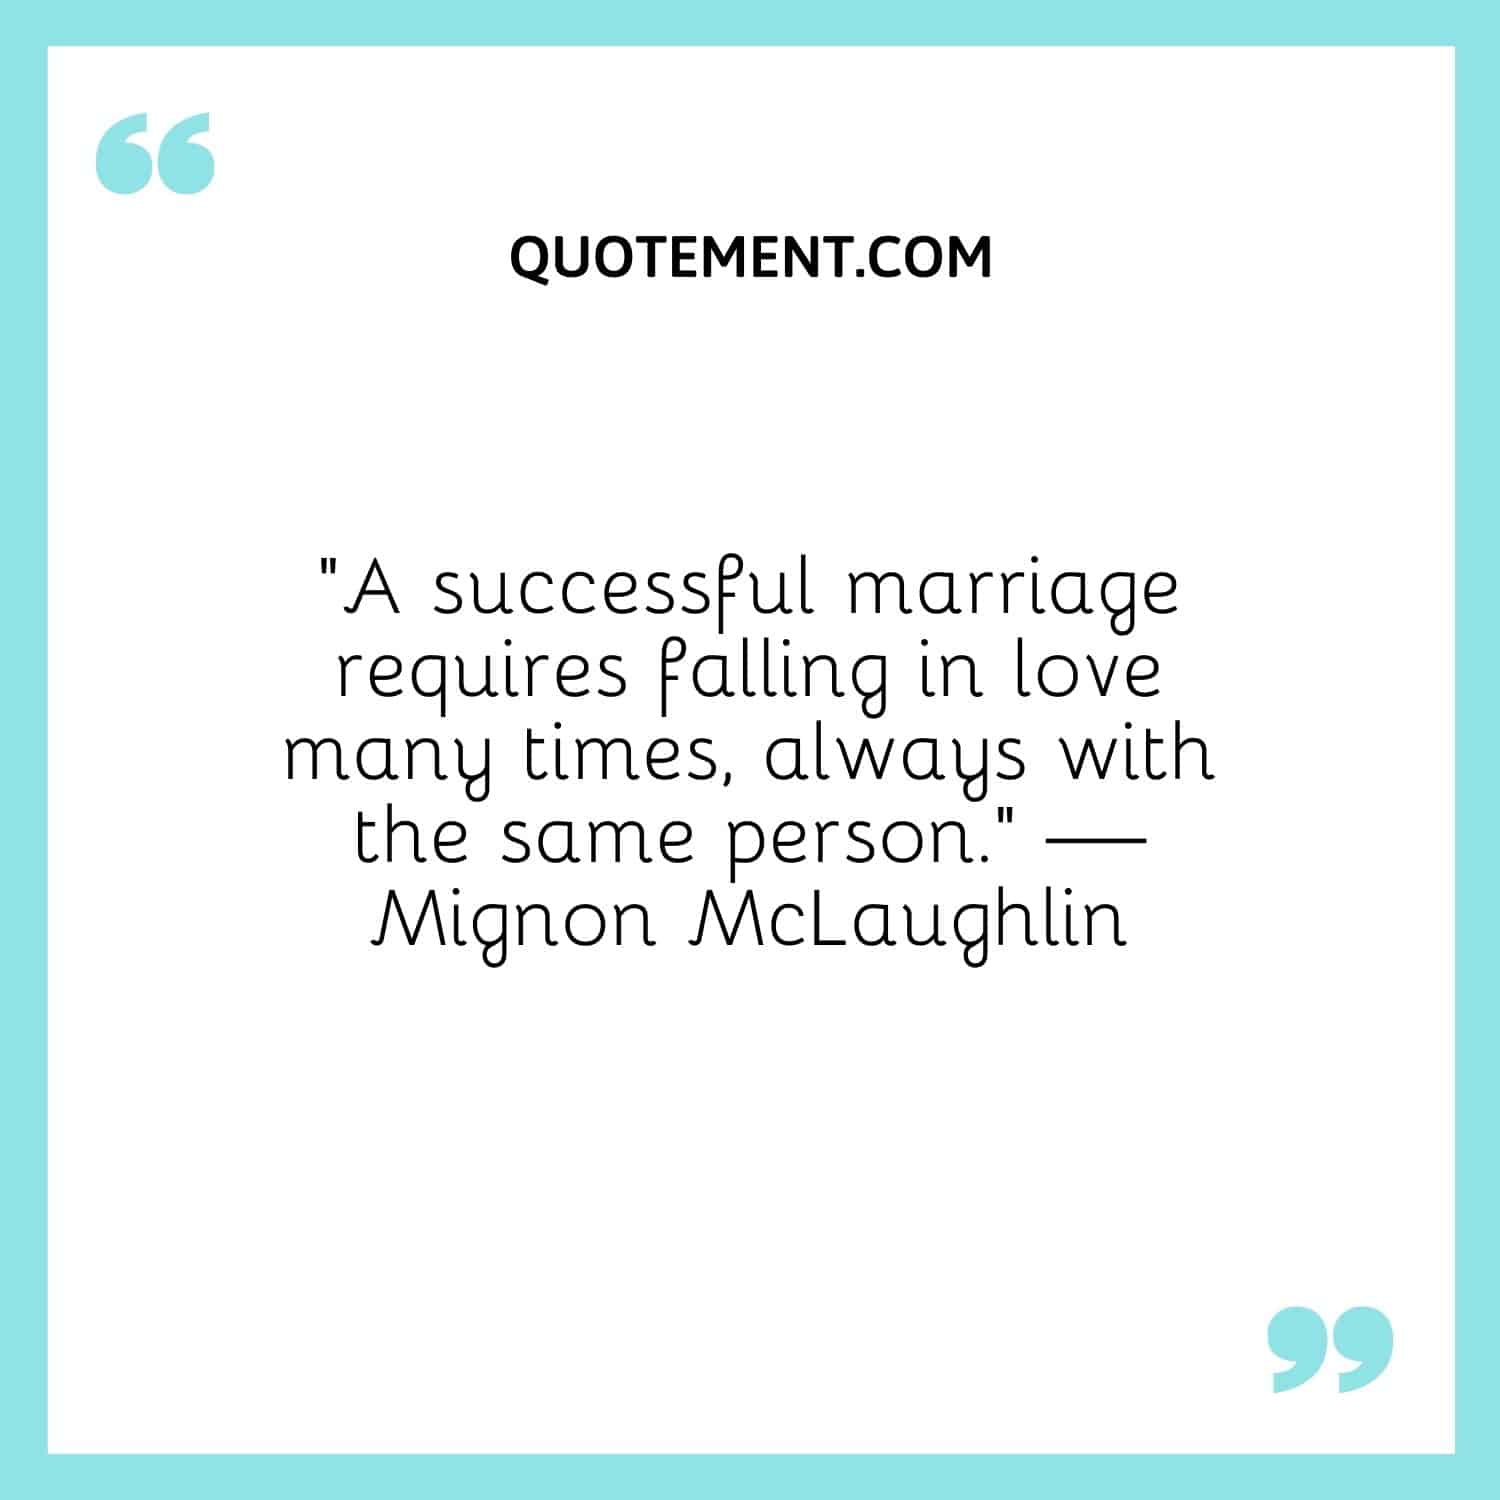 “A successful marriage requires falling in love many times, always with the same person.” — Mignon McLaughlin